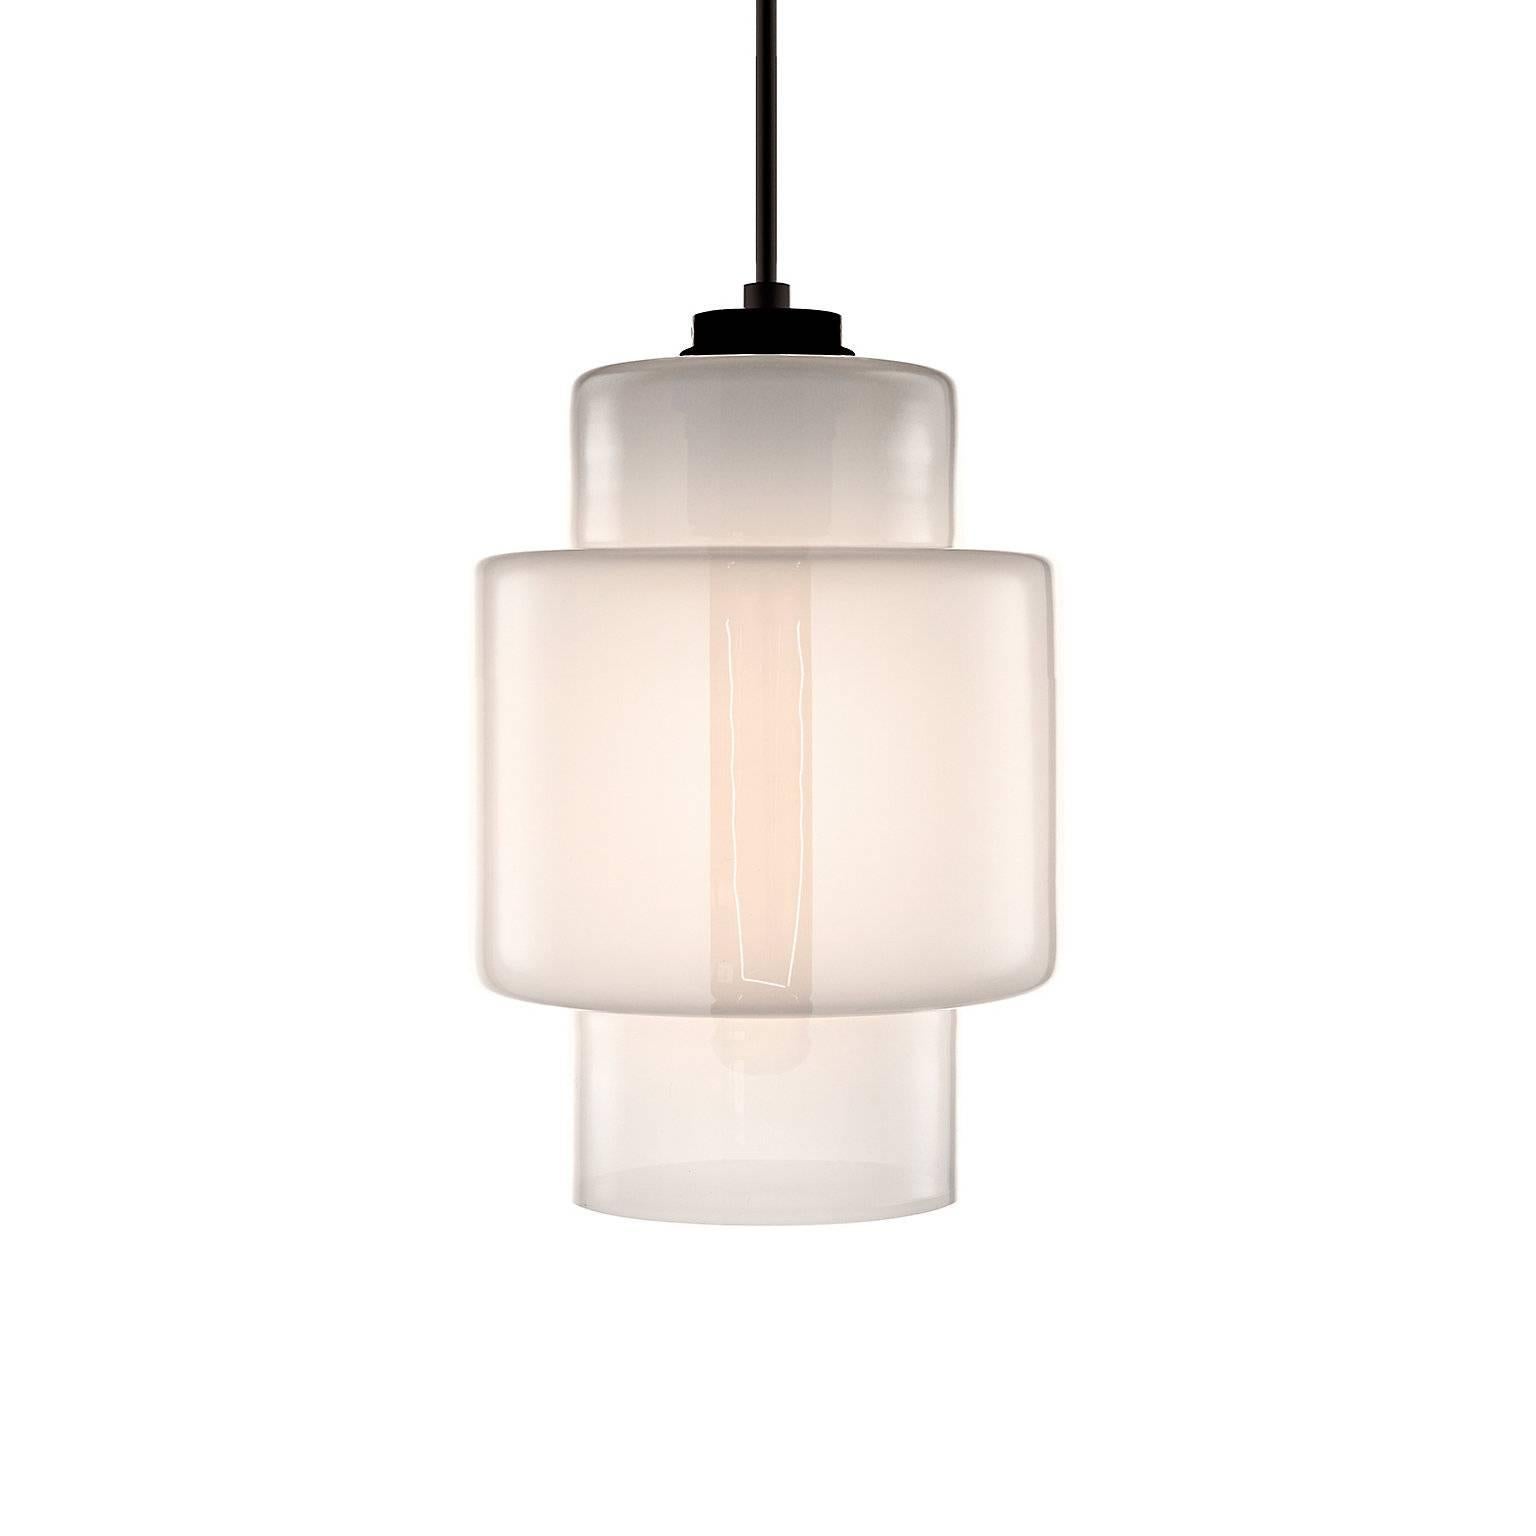 Axia Gray Handblown Modern Glass Pendant Light, Made in the USA In New Condition For Sale In Beacon, NY